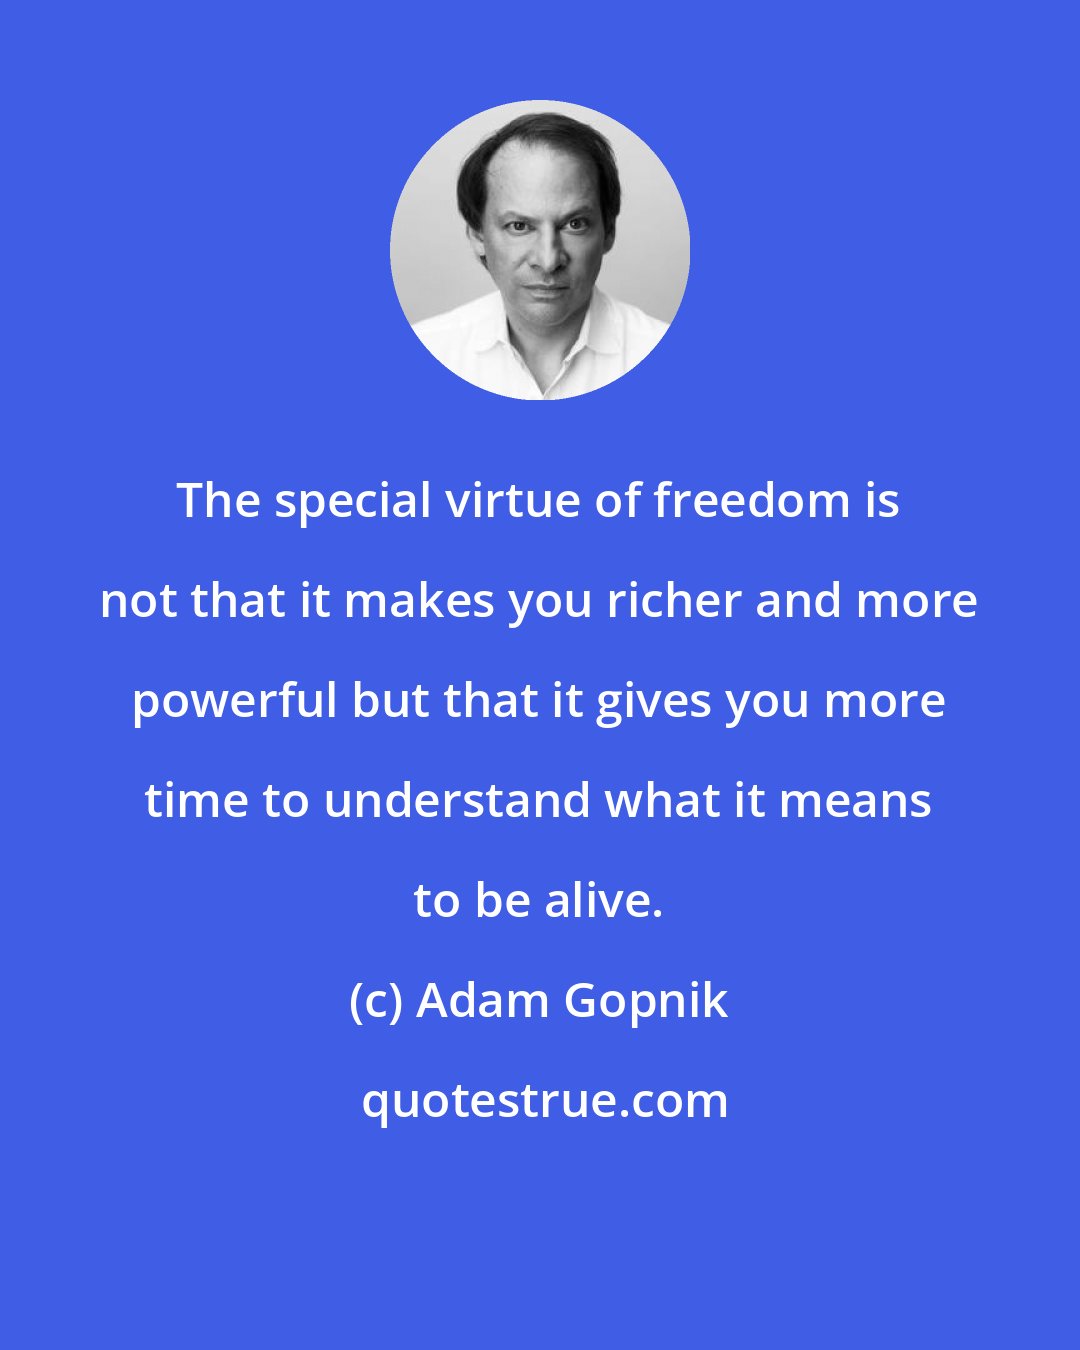 Adam Gopnik: The special virtue of freedom is not that it makes you richer and more powerful but that it gives you more time to understand what it means to be alive.